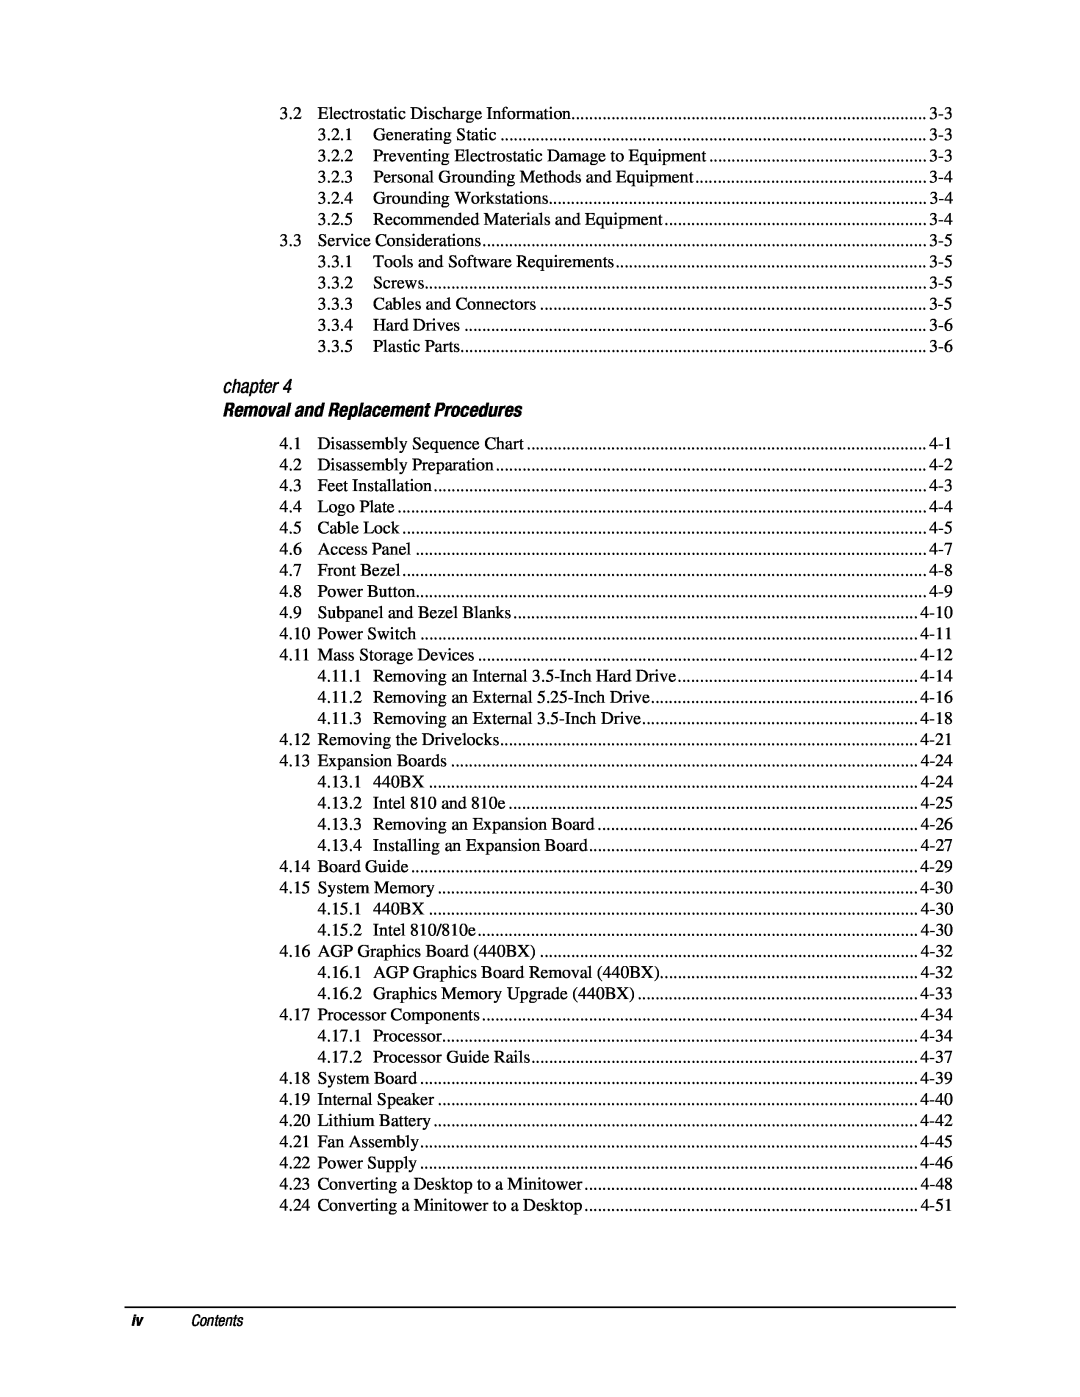 Compaq EP Series manual Removal and Replacement Procedures, chapter, iv Contents 